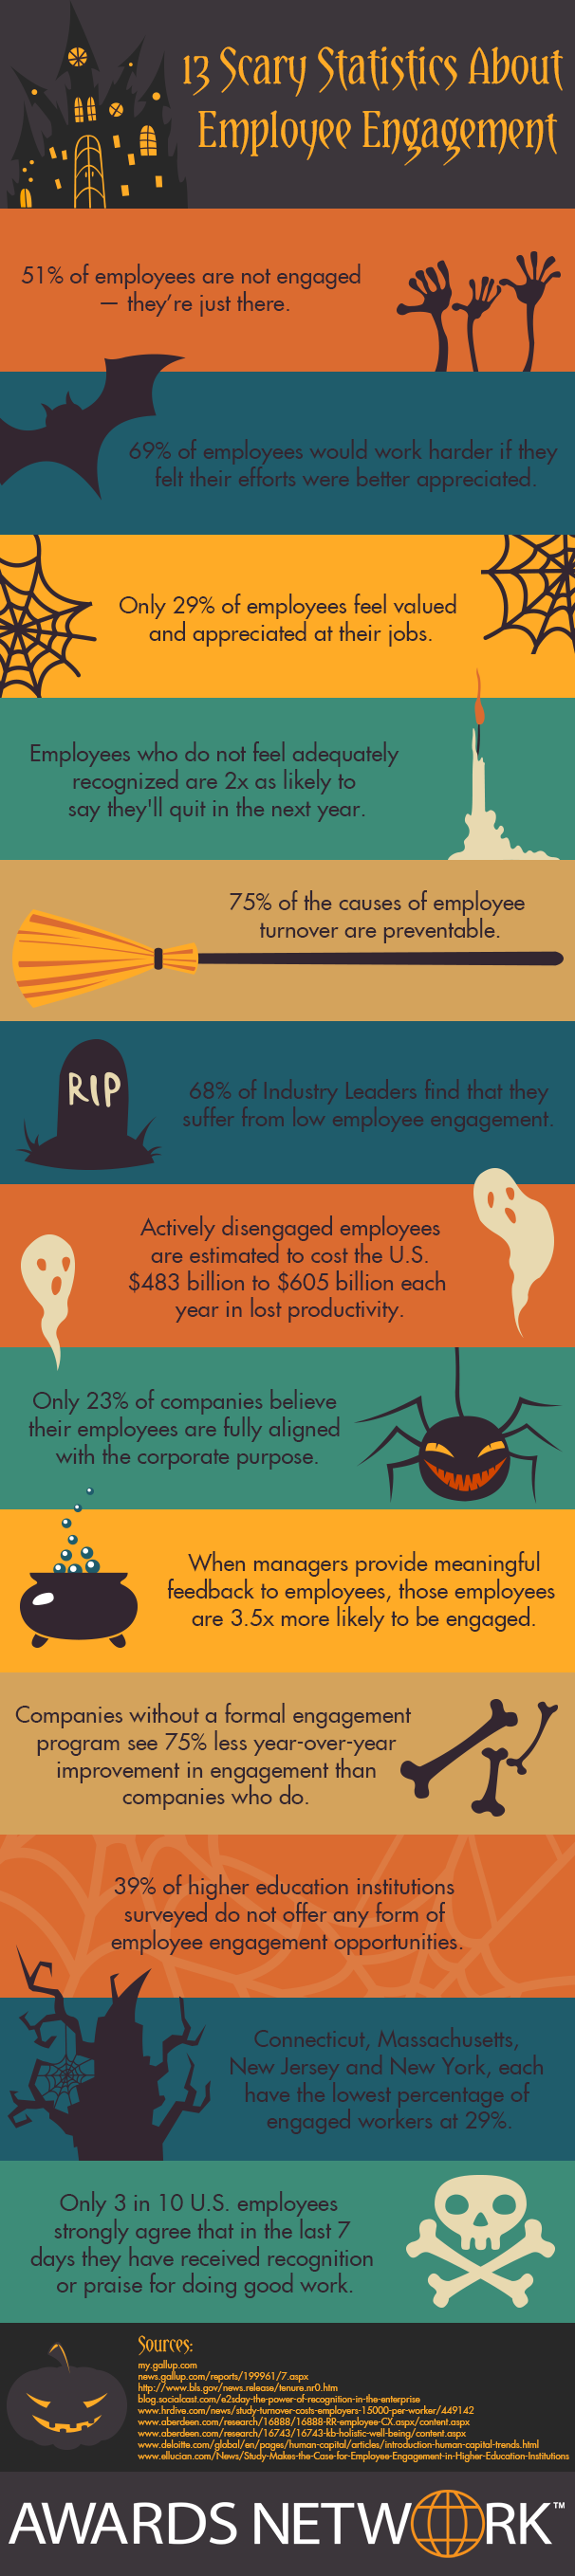 13 Scary Statistics About Employee Engagement - Infographic